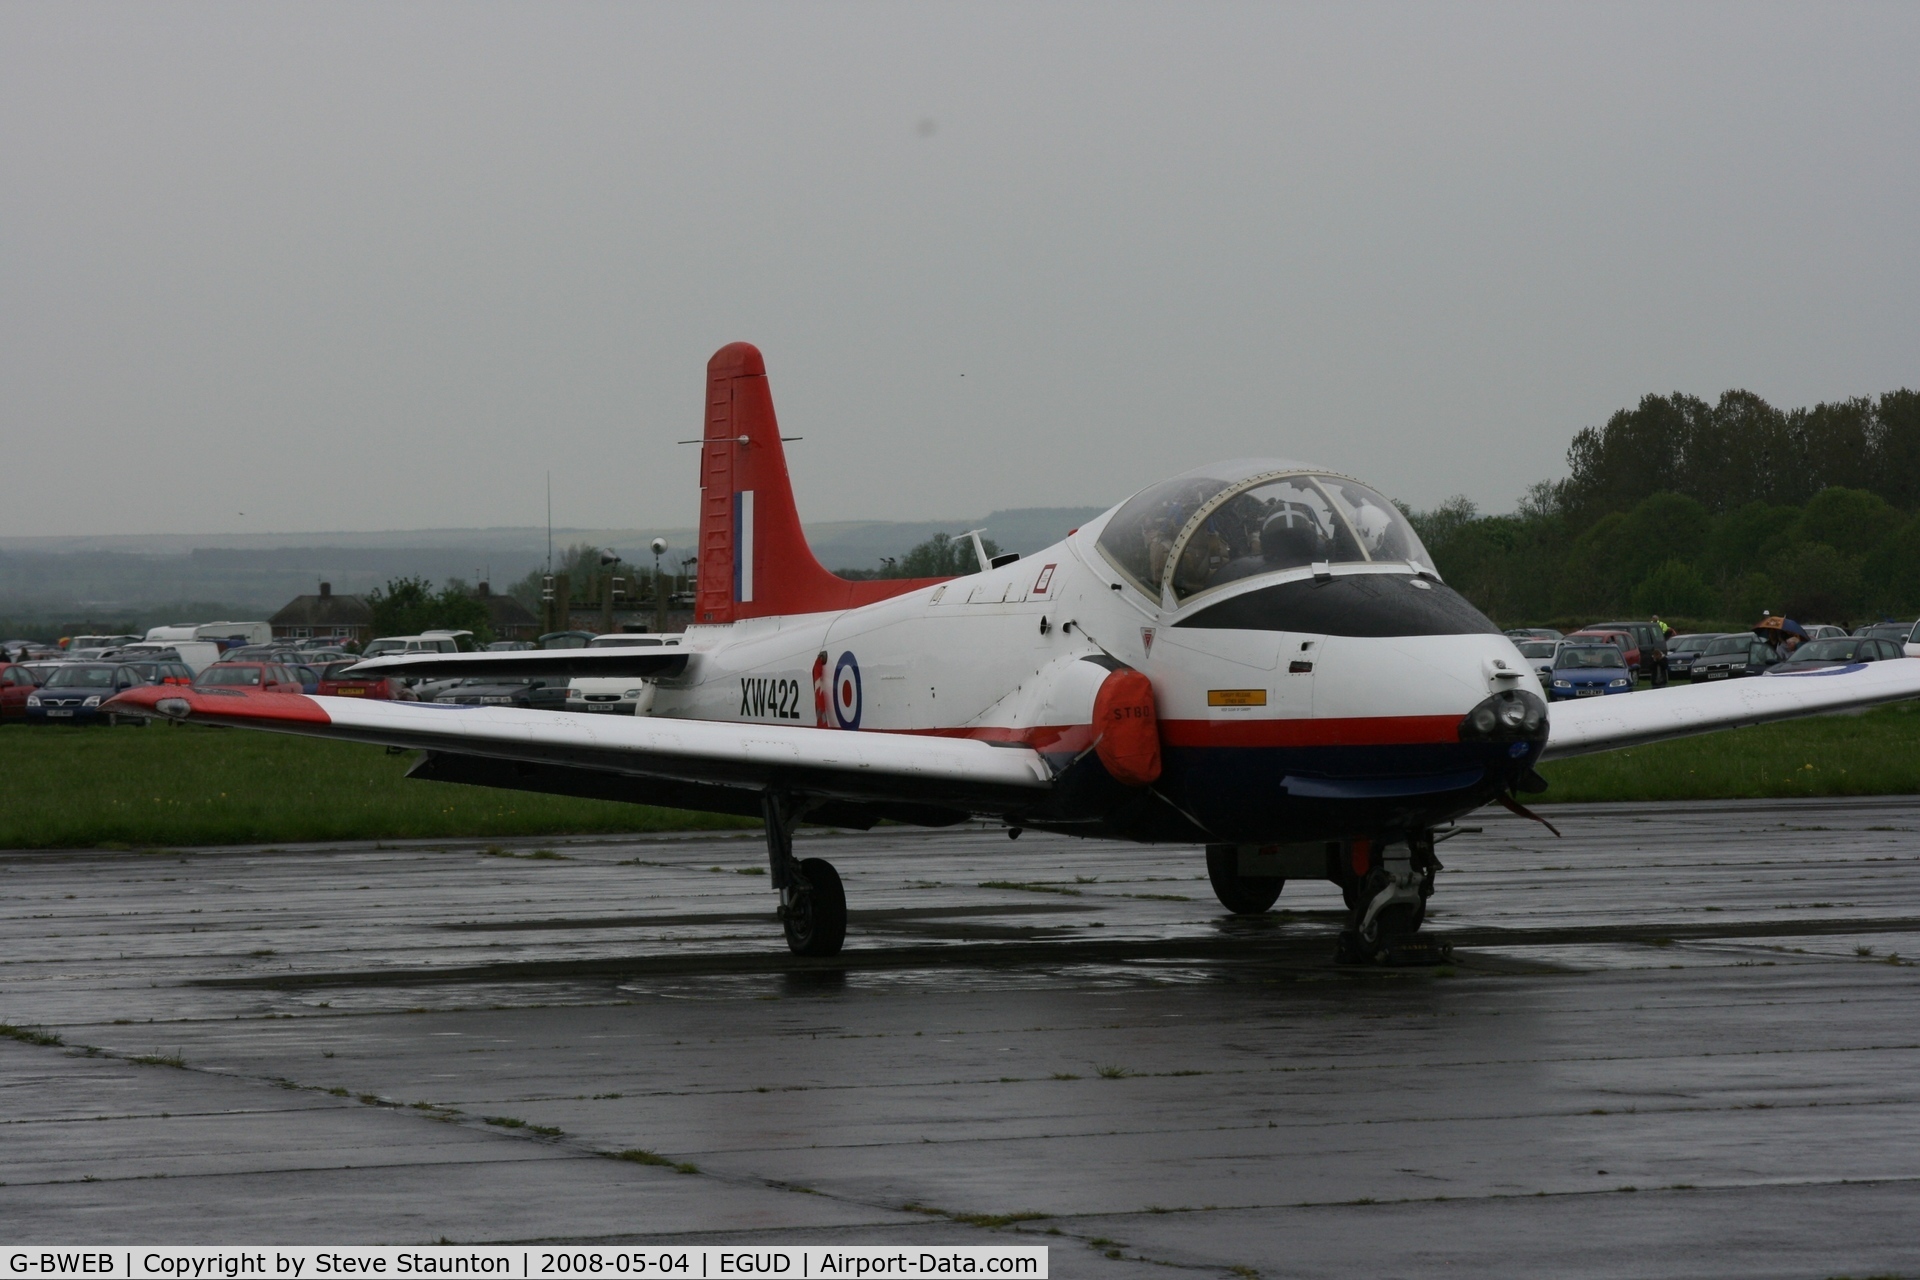 G-BWEB, 1971 BAC 84 Jet Provost T.5A C/N EEP/JP/1044, Taken at Abingdon Air & County Show 2008 in aid of the Thames Valley and Chiltern Air Ambulance (http://www.abingdonfayre.com/)